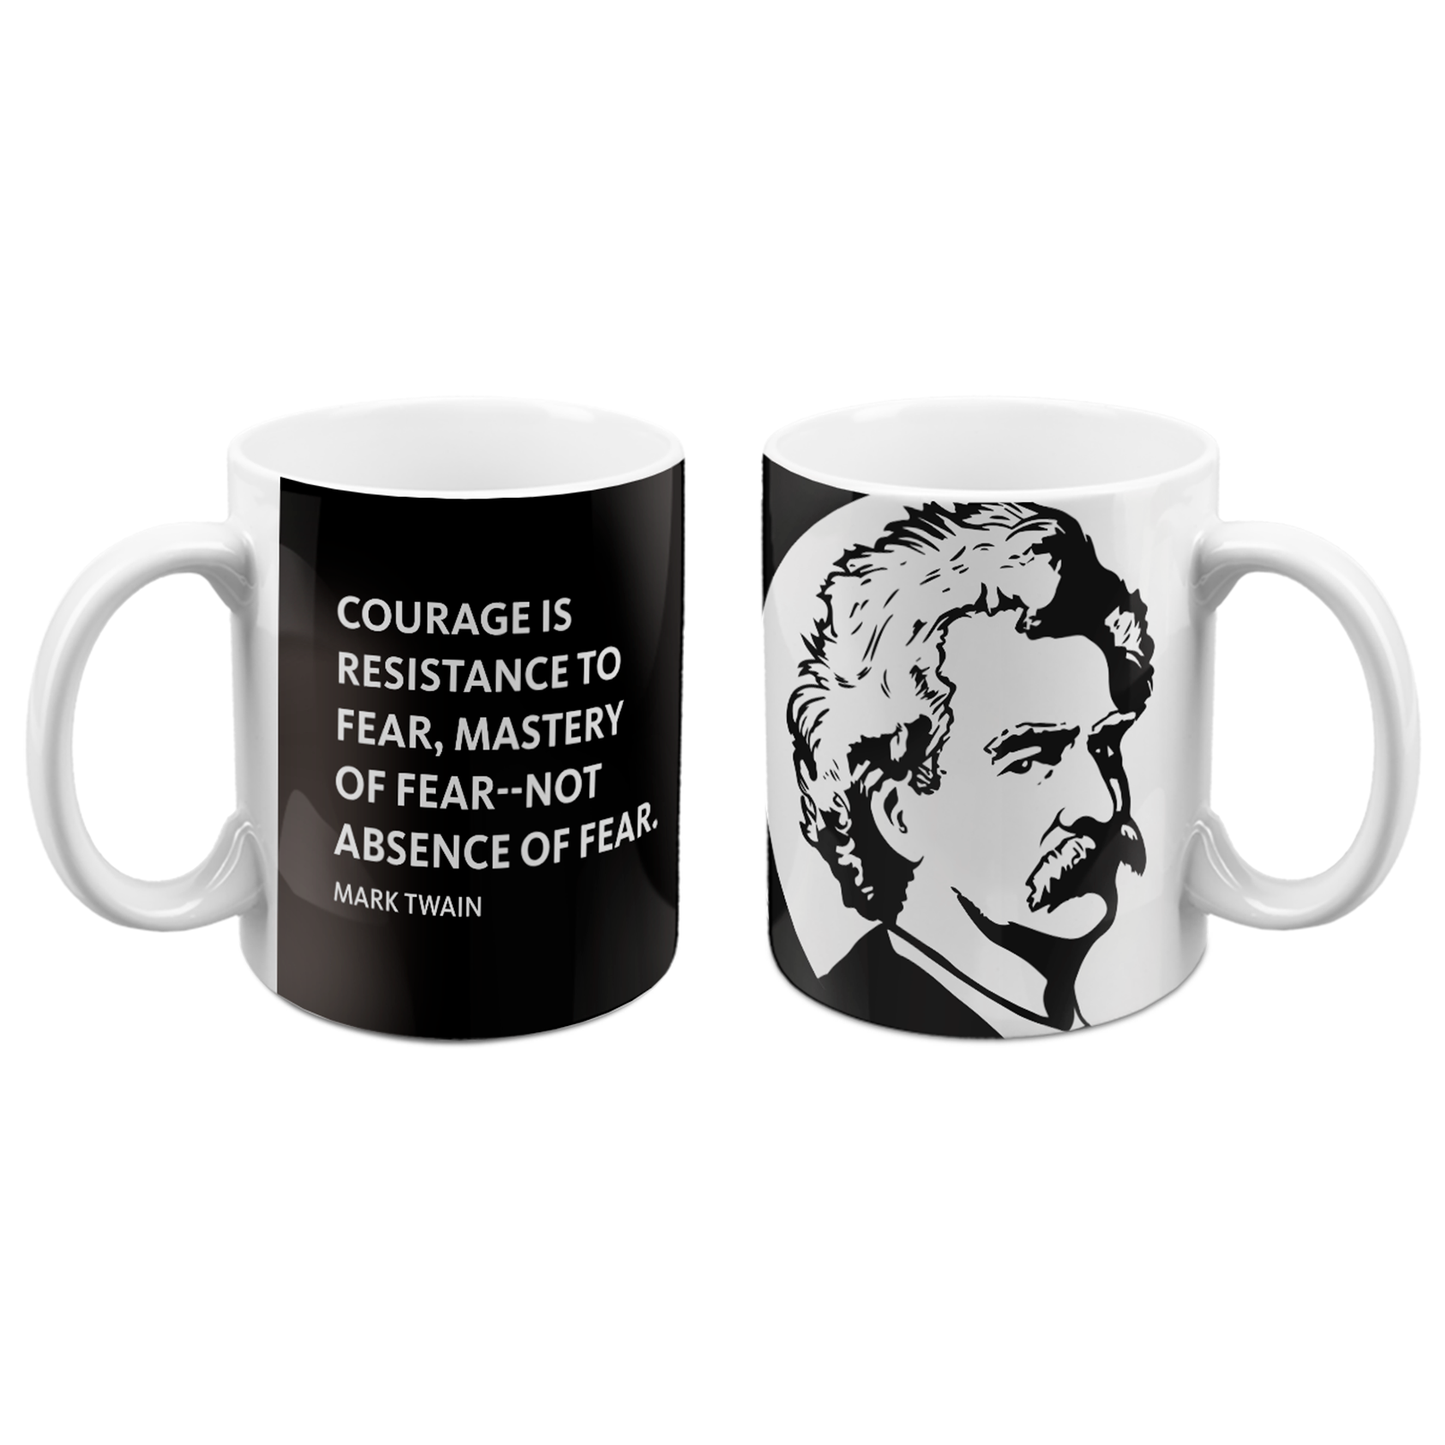 Quote Mug "Courage is Resistance..."